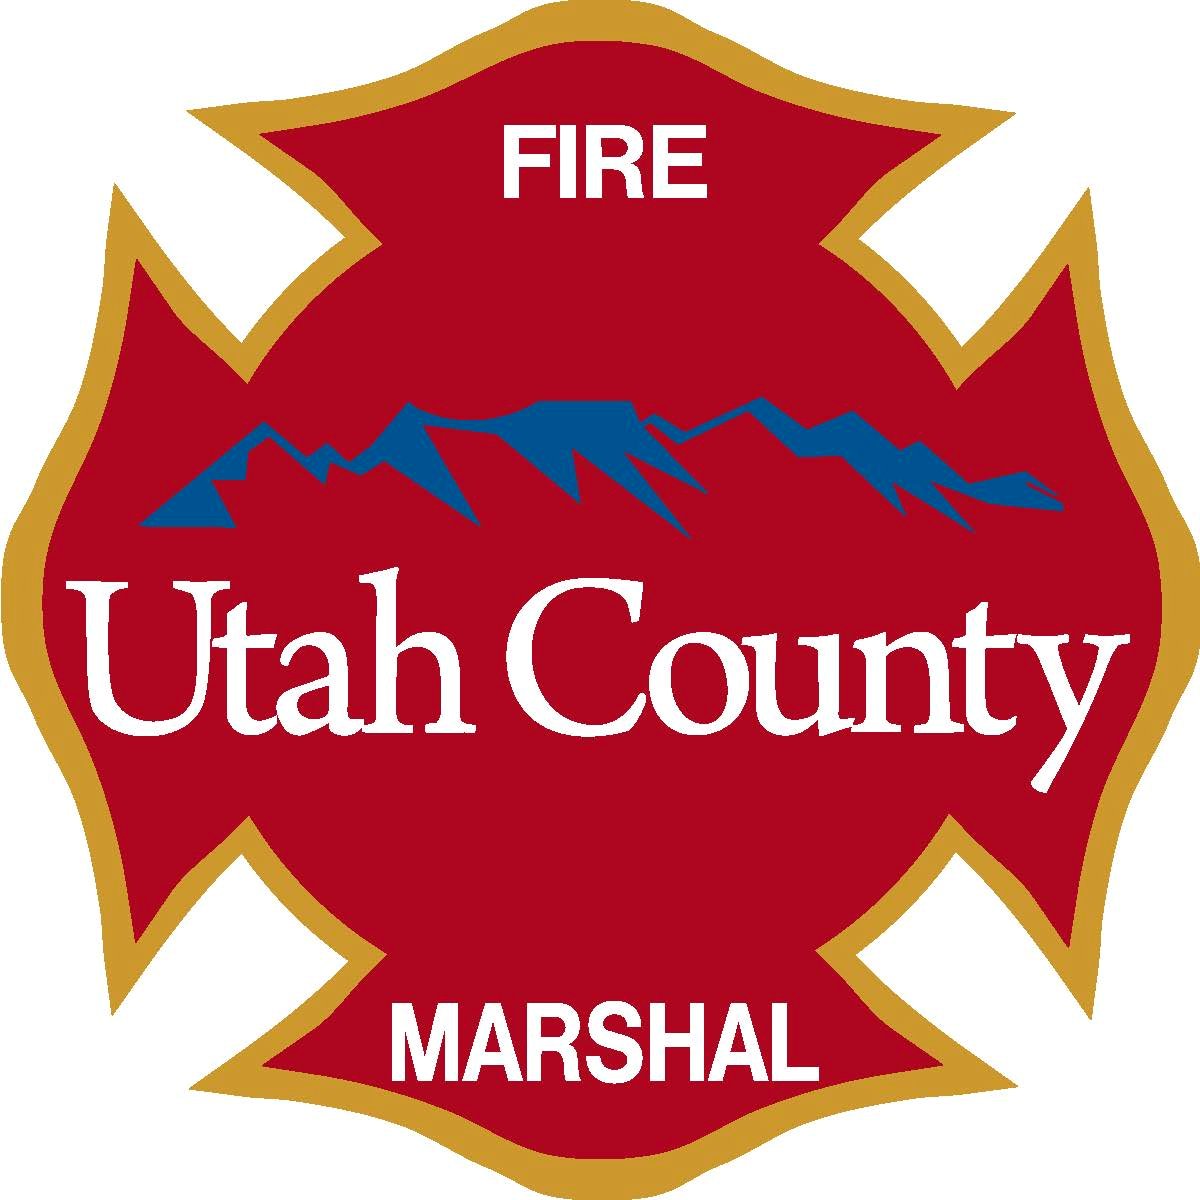 The official account of the Utah County Fire Marshal. #utahcounty #savinglivesthroughfireprevention